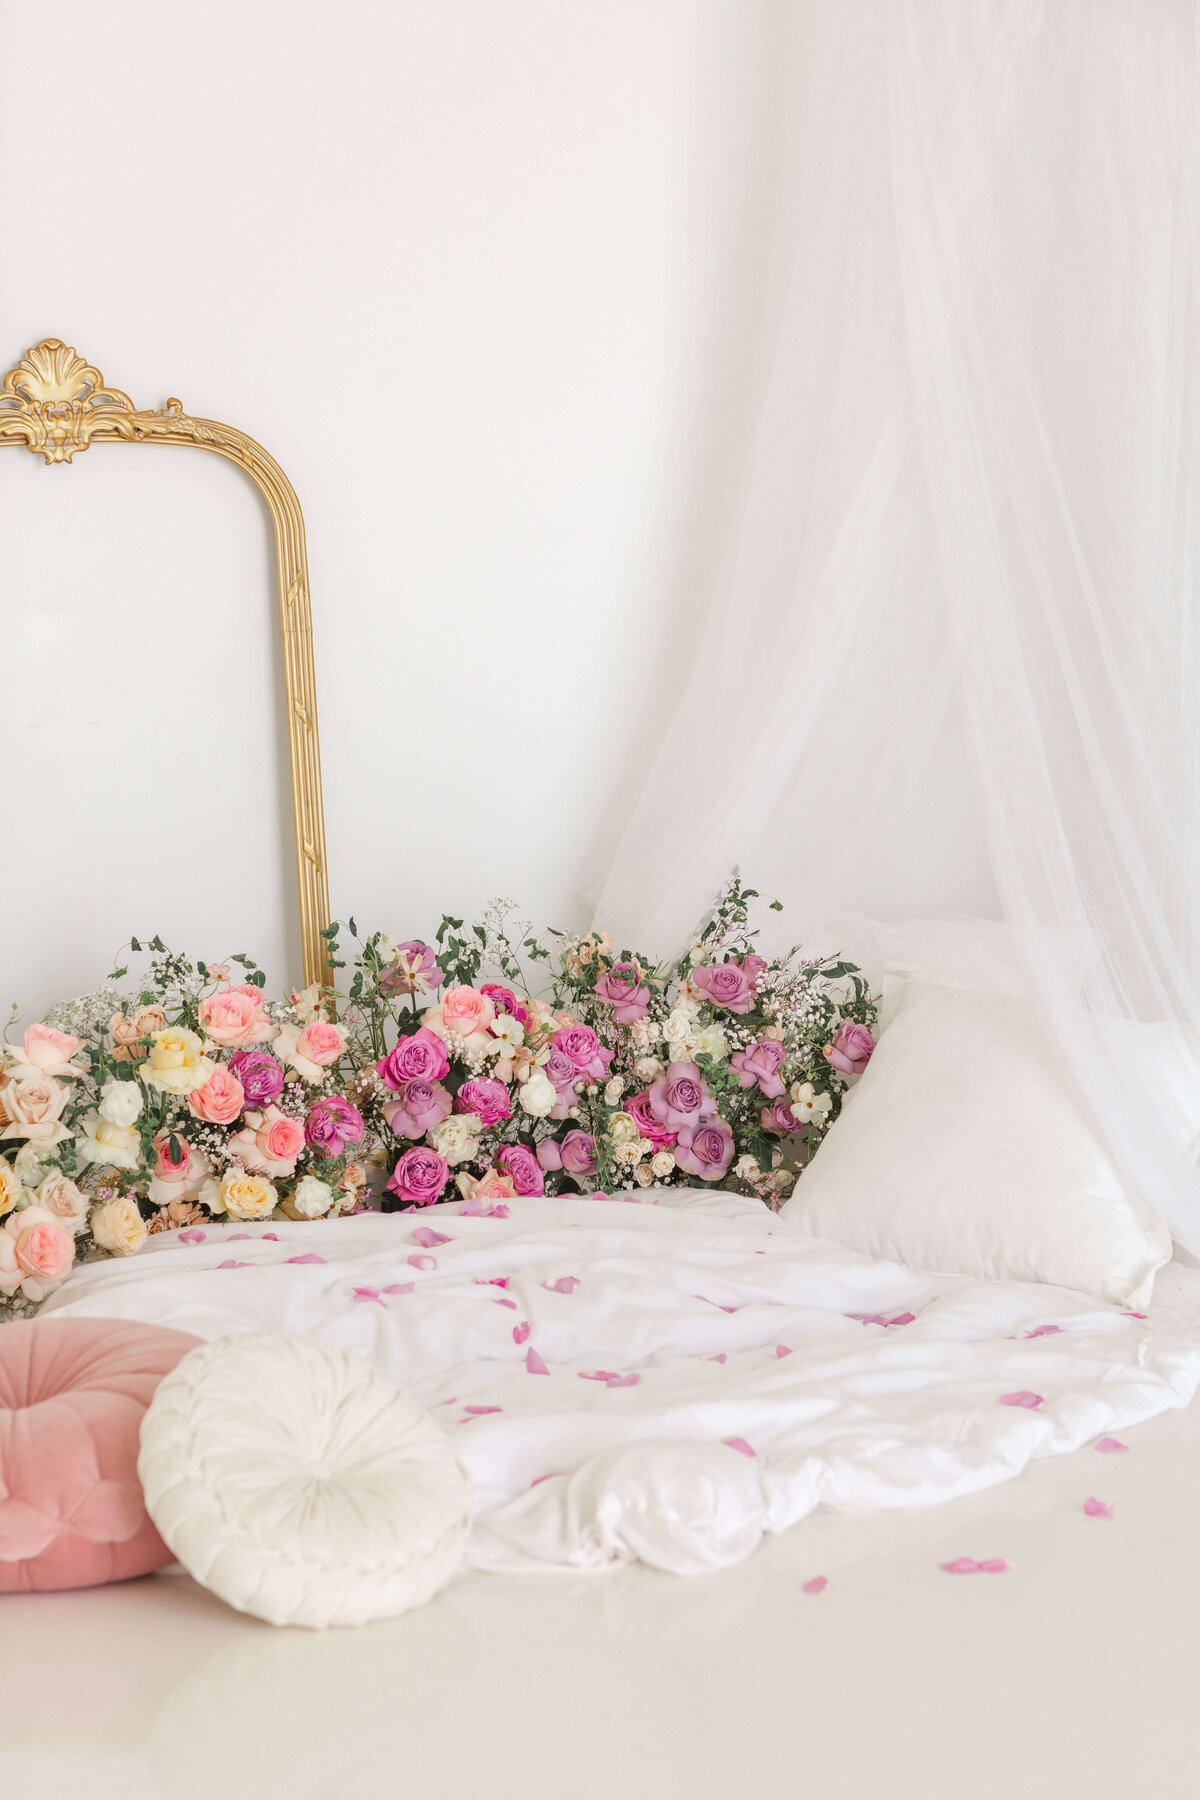 roses in peach, blush and pink with throw blankets, pillows and a gold mirror